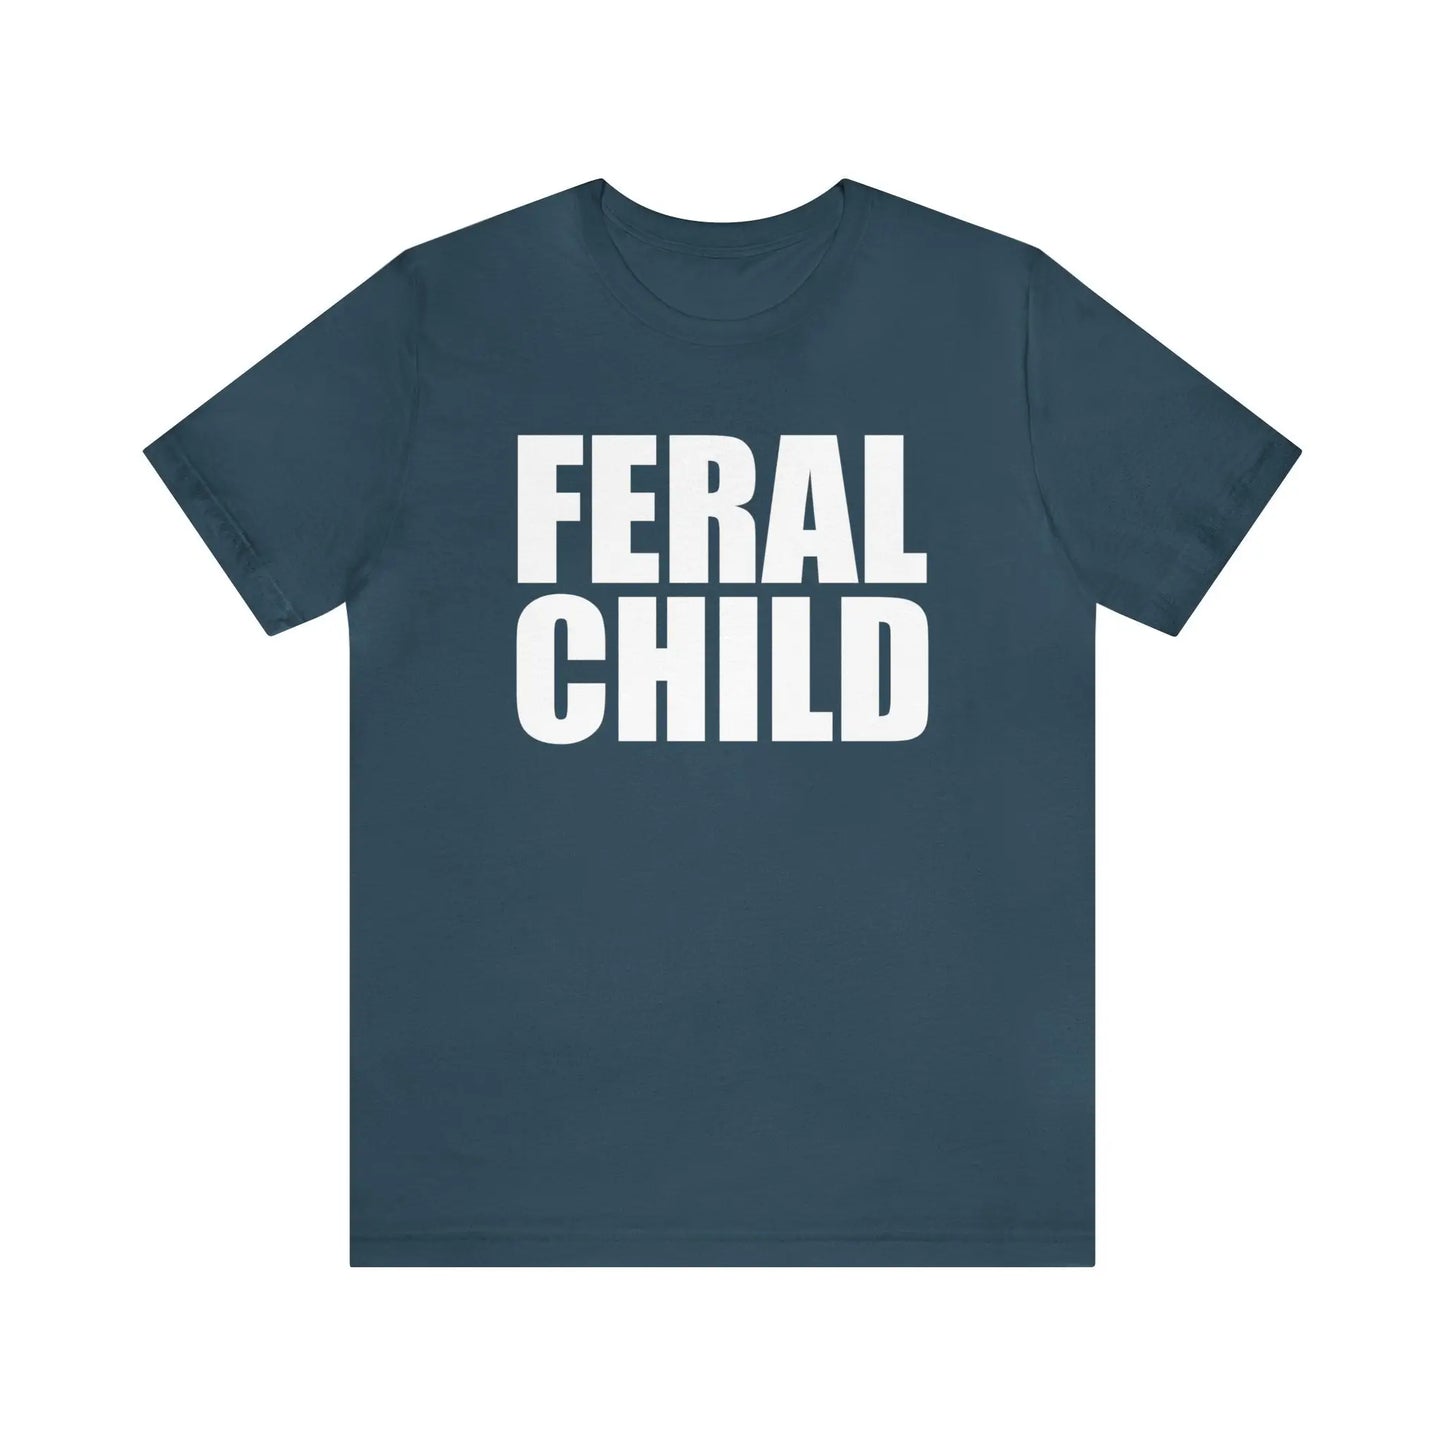 Feral Child Men's Tee - Wicked Tees